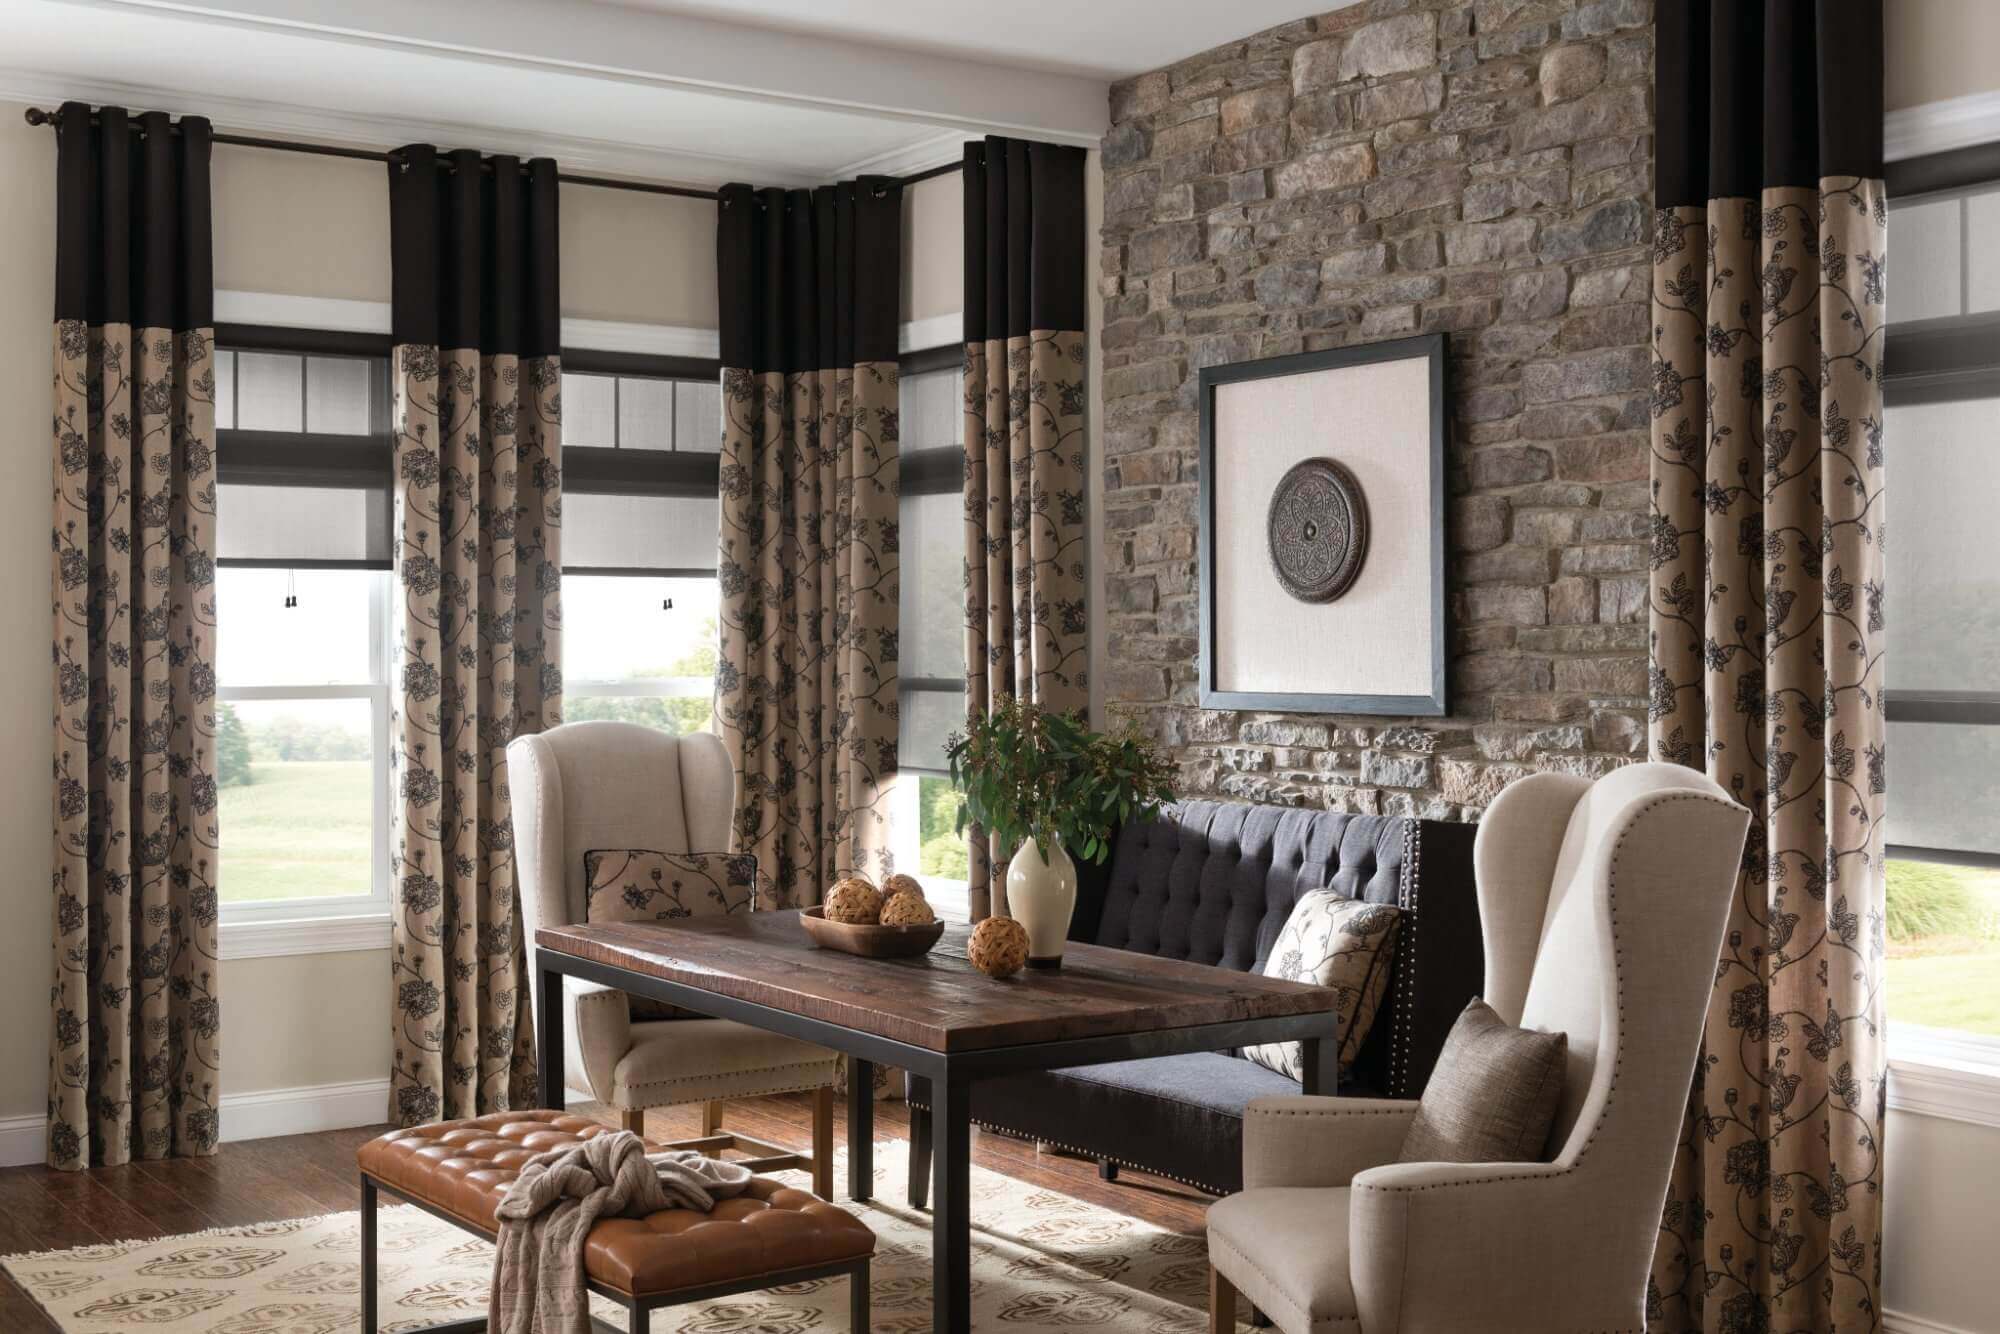 Your dining room is a great place for elegance and a bold statement in your window treatments.